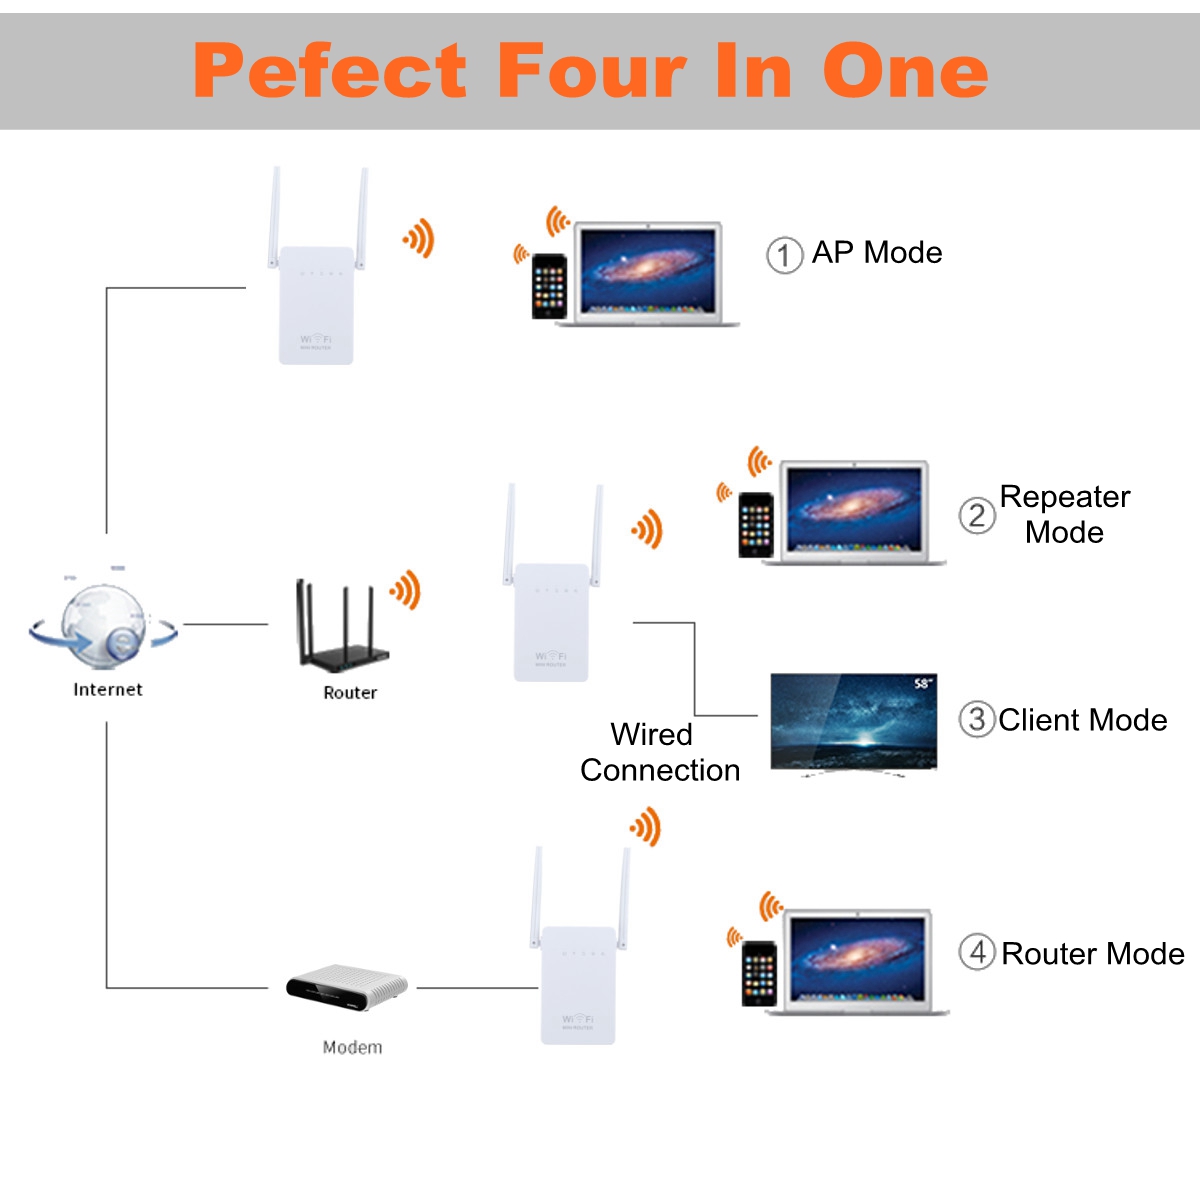 300Mbps Wireless Wifi Range Repeater Booster 802.11 Dual Antennas Wireless AP Router with LAN WAN Port